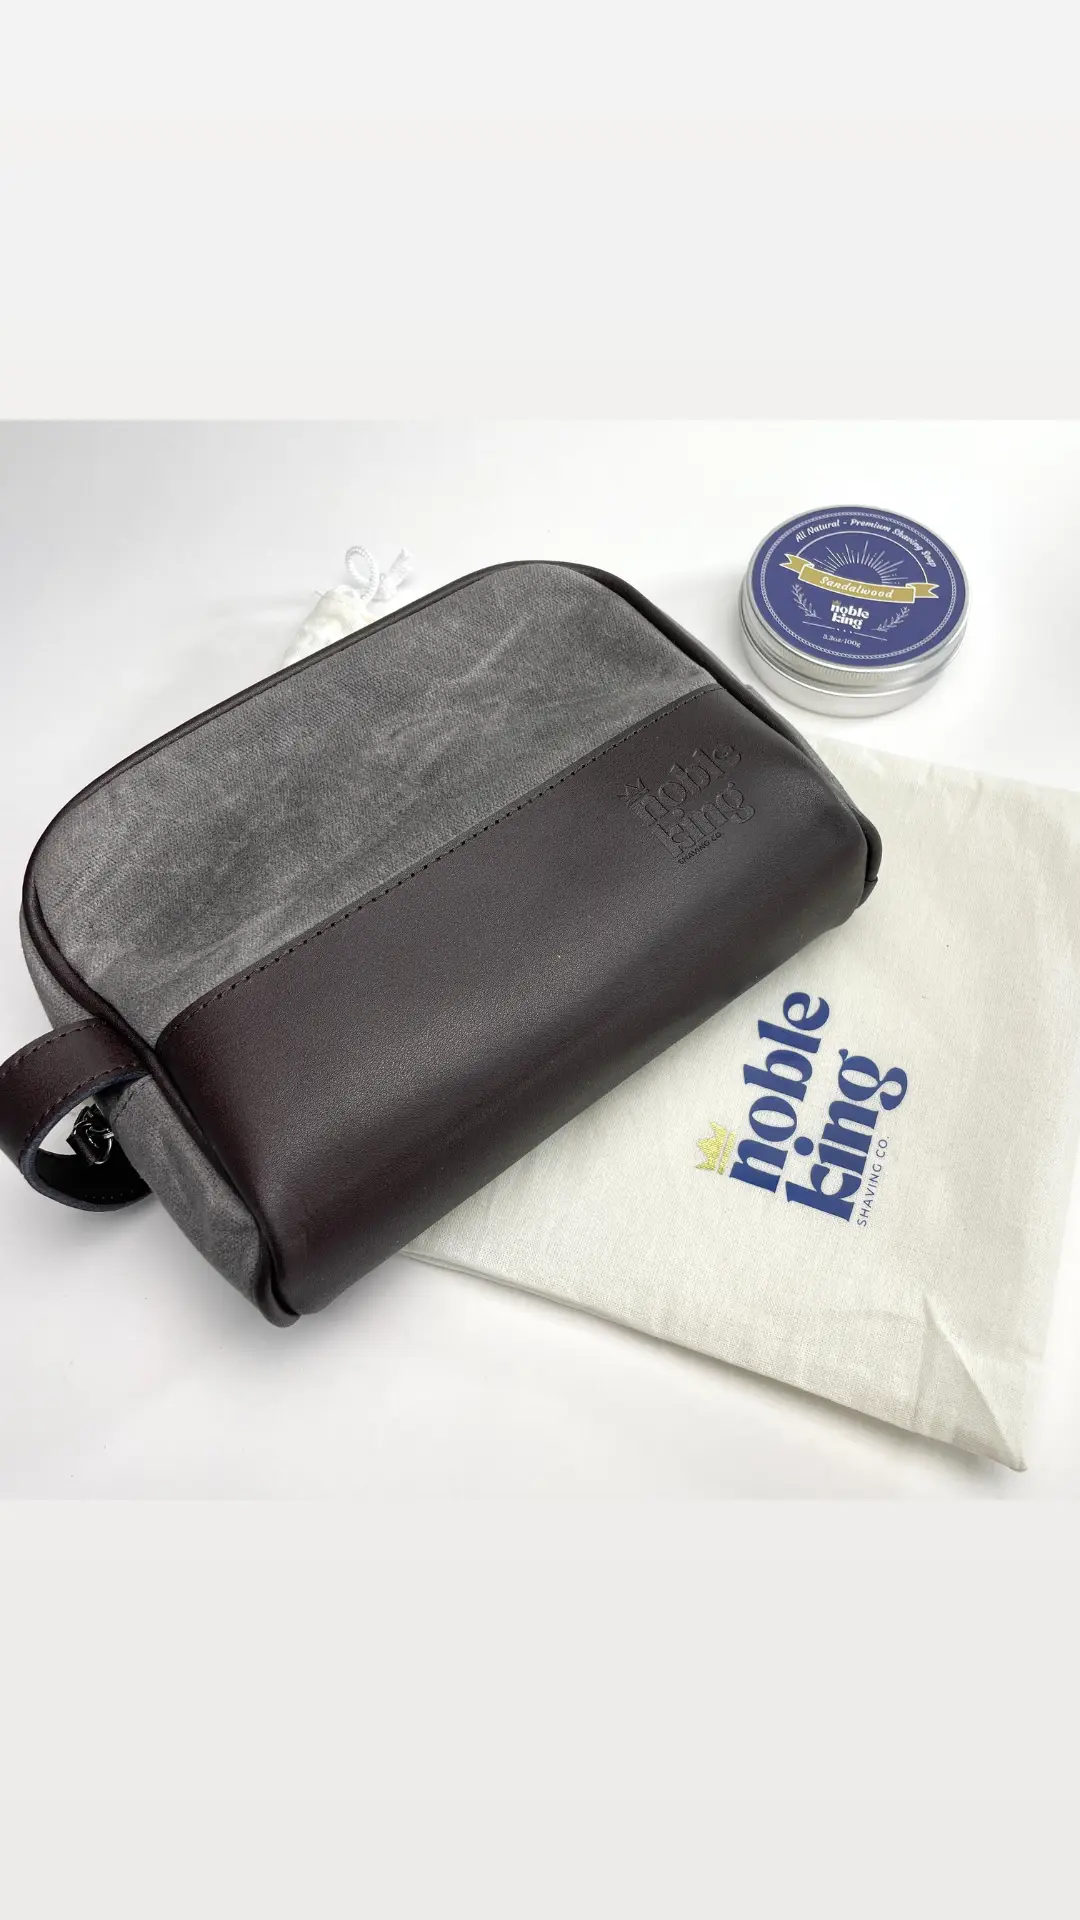 The perfect gift for dad 🪒 Our luxury shaving kit comes with a genuine leather carrying case. Dad deserves the best! 🔥 #fathersdaygifts #giftsfordad #giftsforhim #mensfashion #reels #giftsforhusband #mensgifts #mensgrooming #shaving #beard #beardgang #amazonfinds #etsyshop #menshair #menstyle 